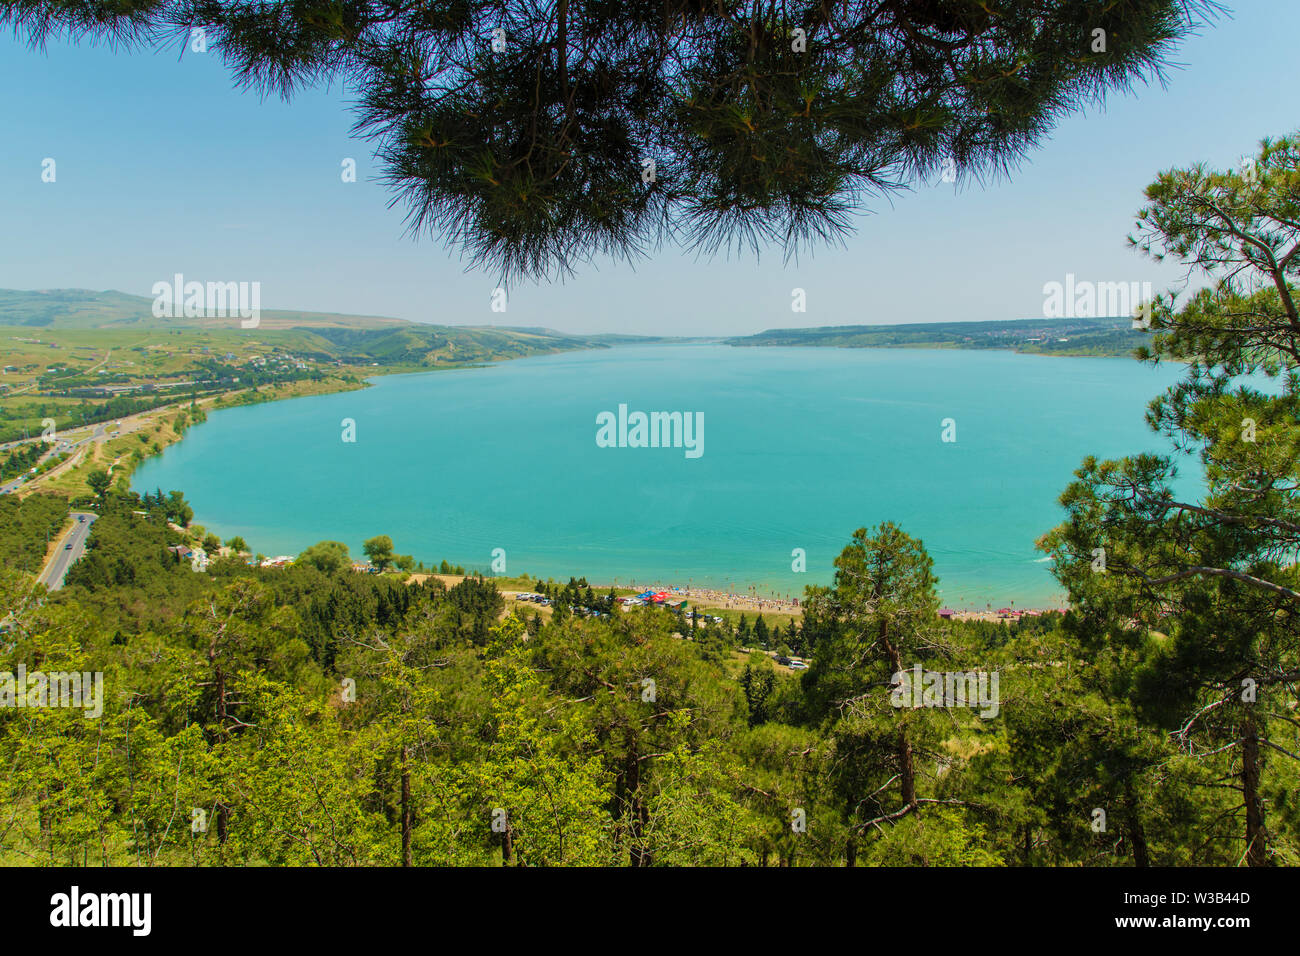 Tbilisi reservoir. View from above. Selective focus nature Stock Photo